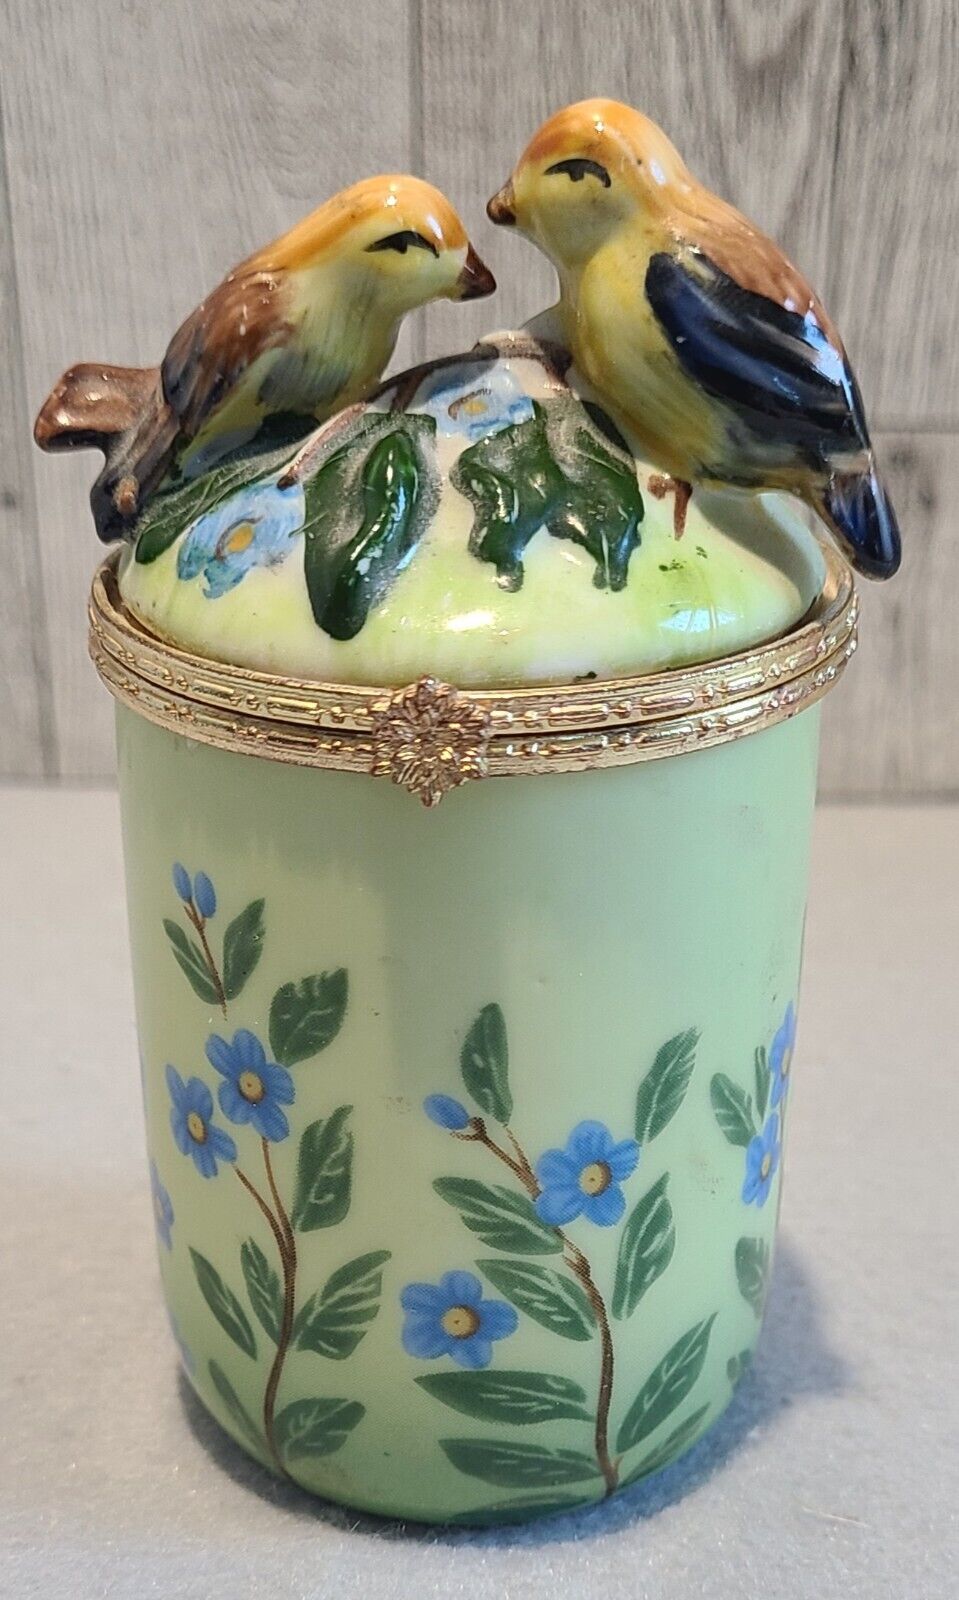 Vintage BOMBAY Company Porcelain Birds and Flowers Candle Holder